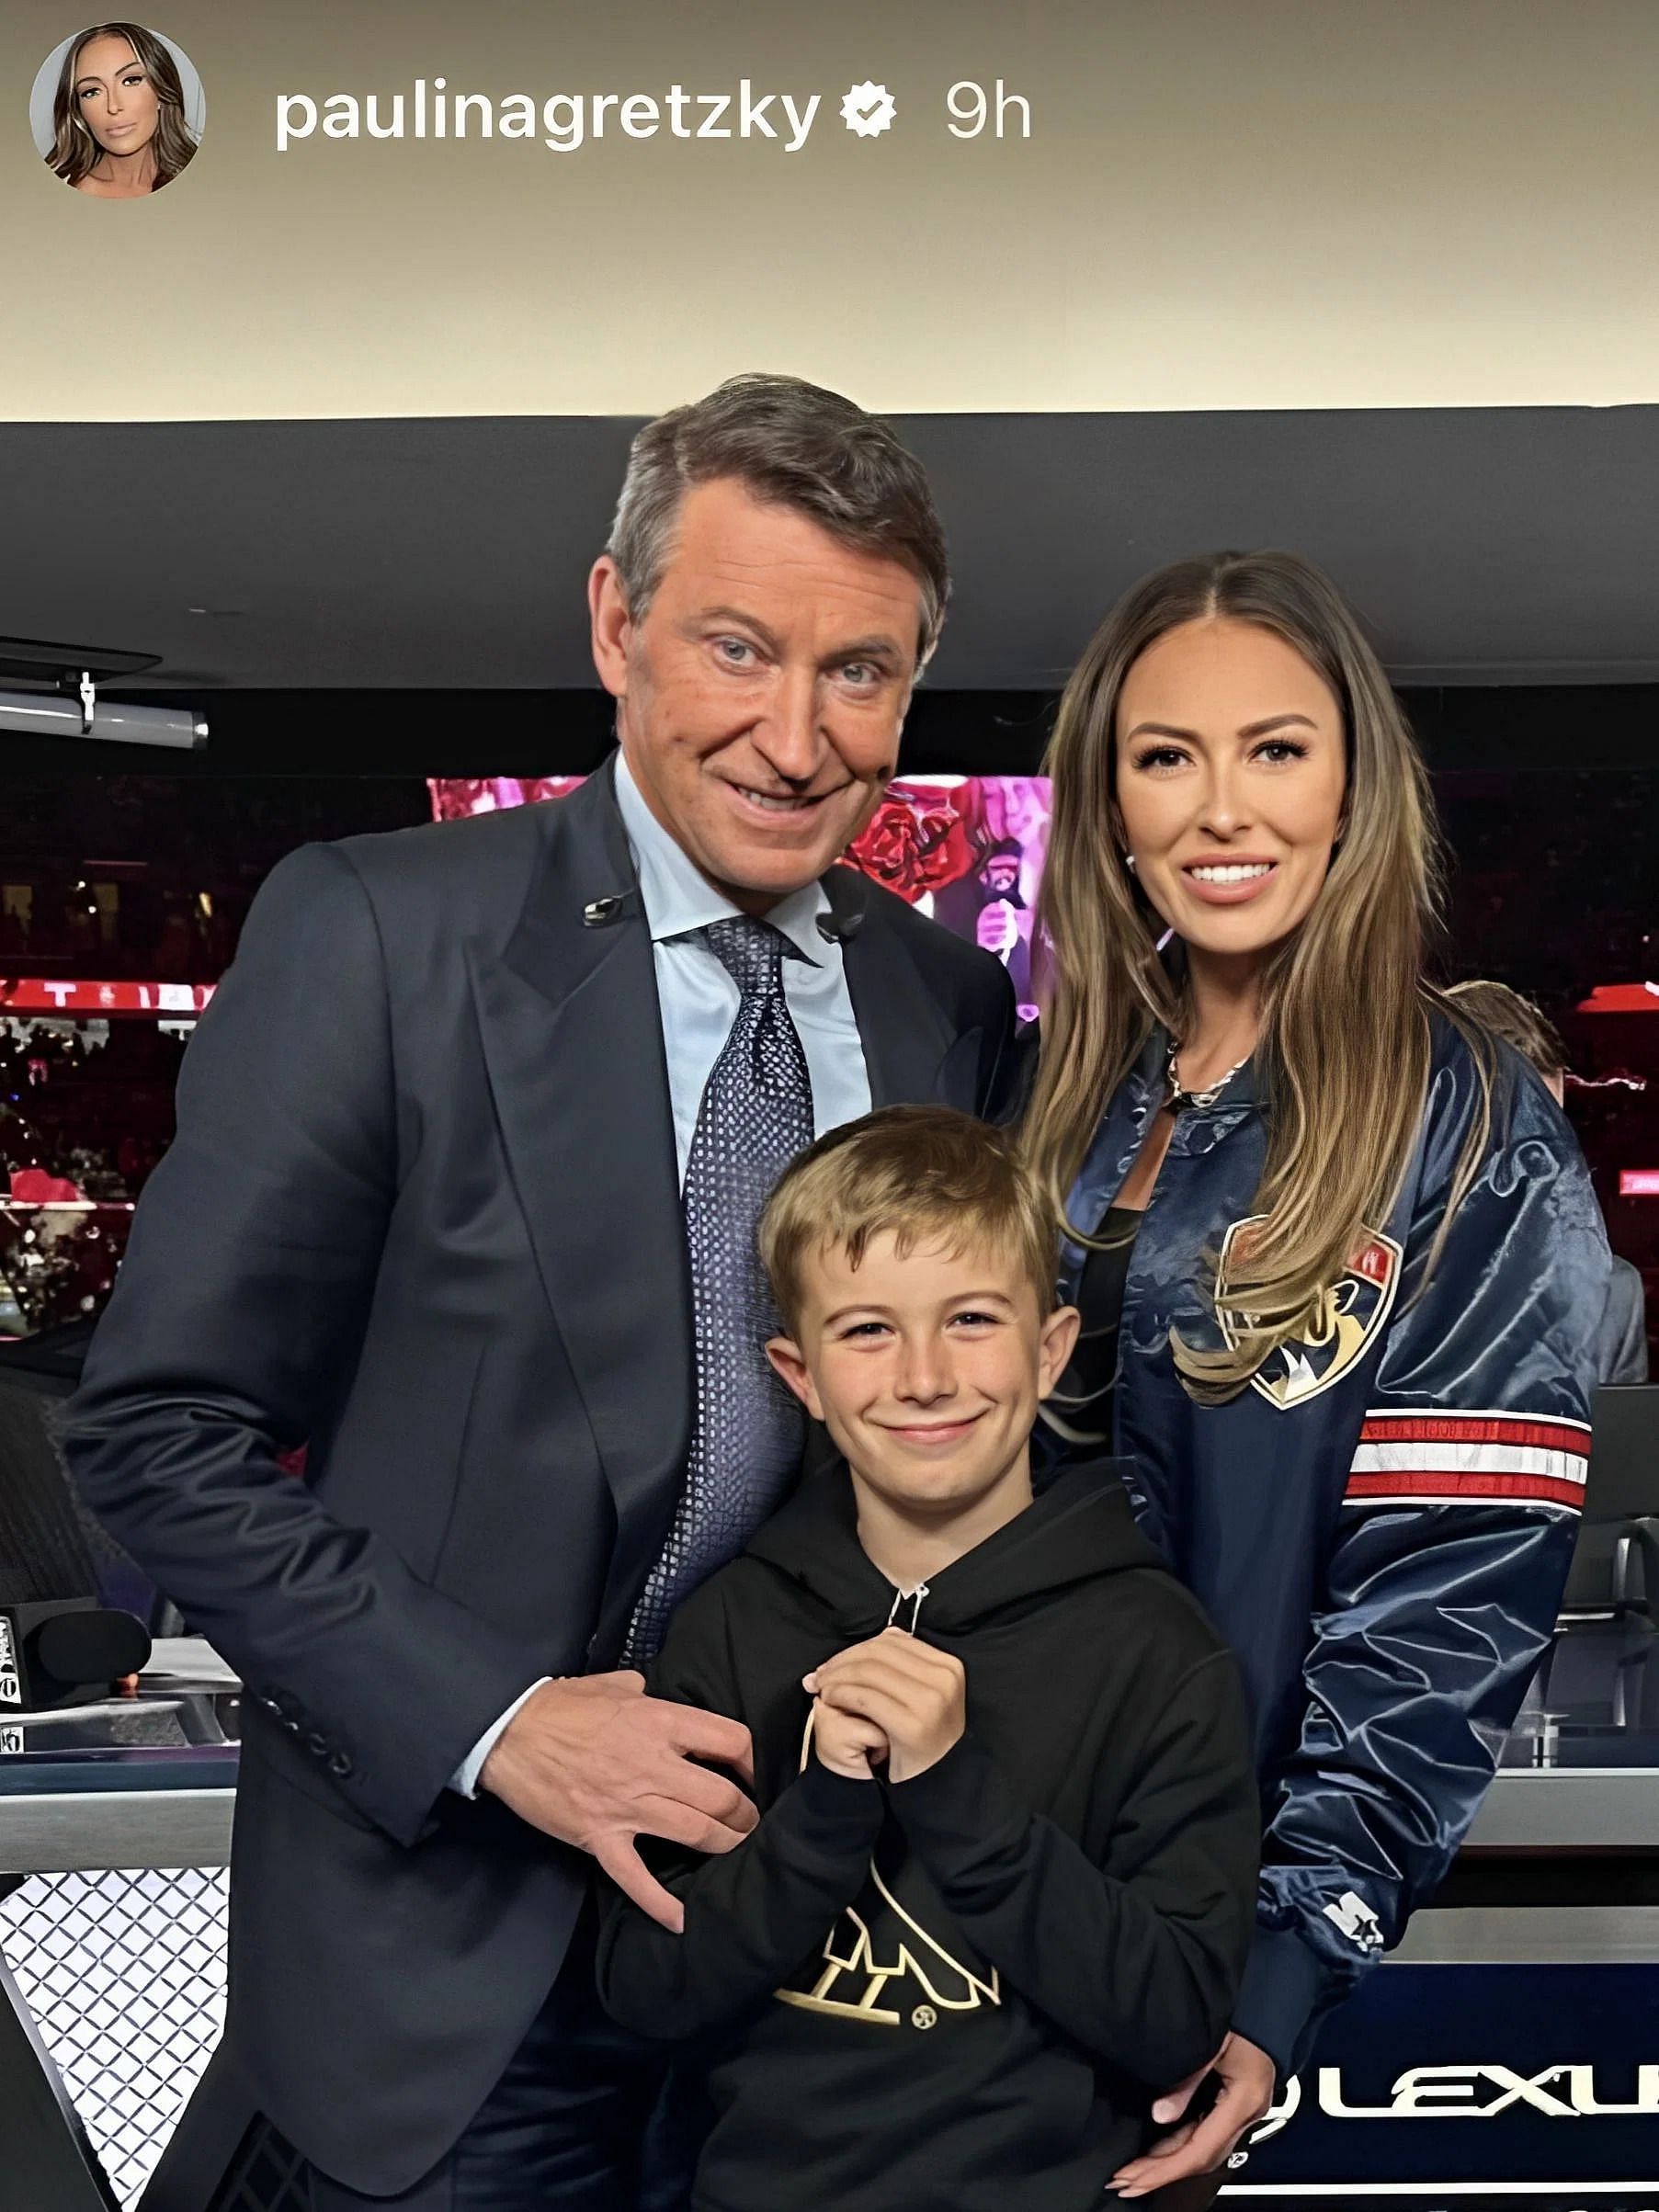 Paulina Gretzky&#039;s snapshot of herself, her father, and her son in the TNT studio